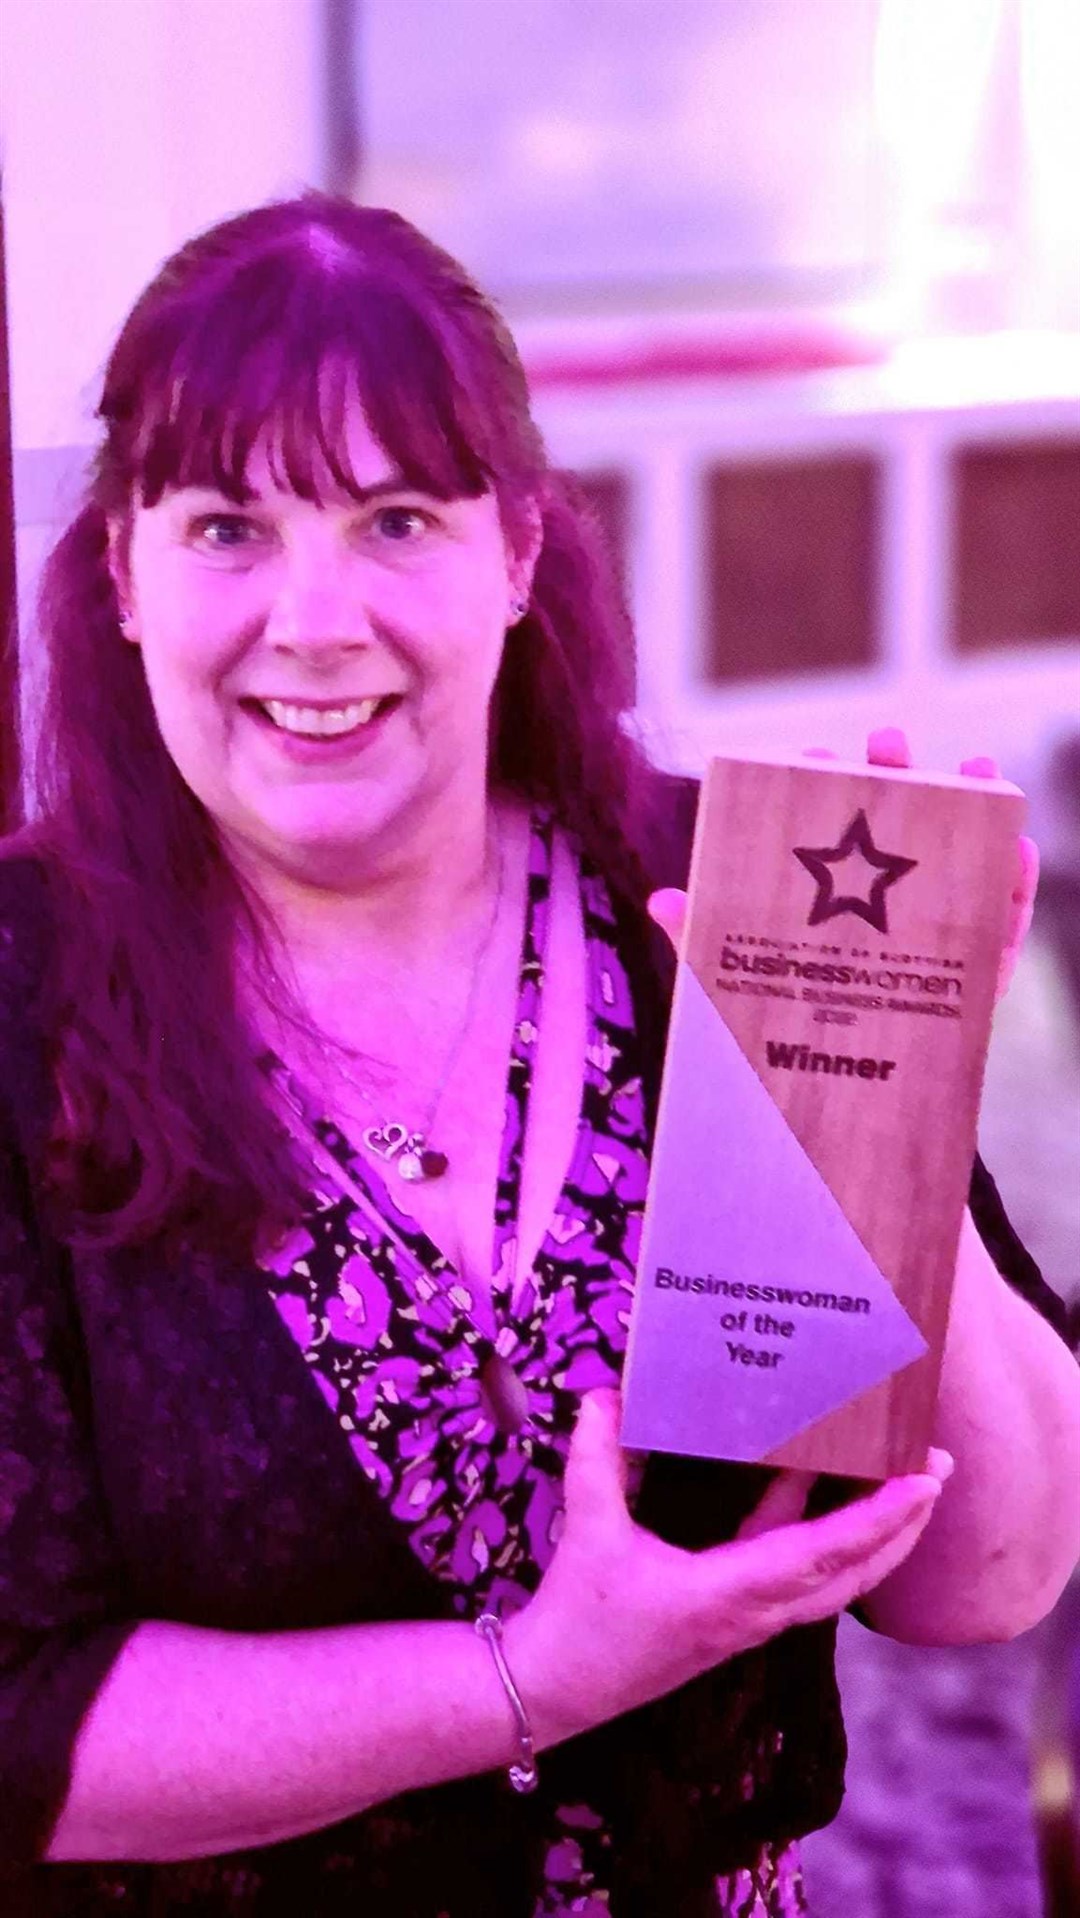 Jane Shepherd of The Town Planner won Business Woman of the Year at the ASB awards earlier this month.